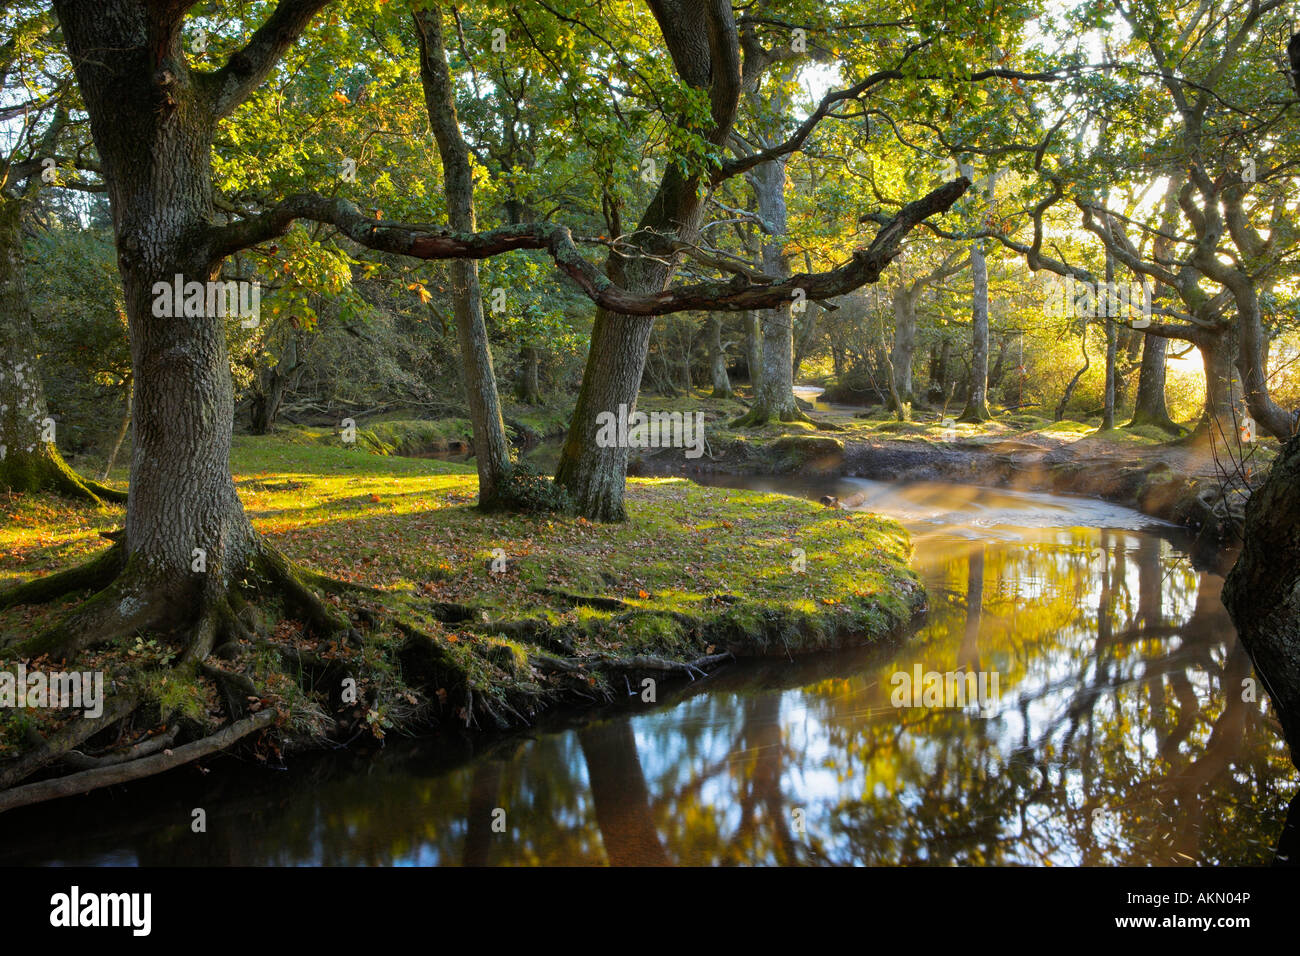 Early morning sunshine lights up this forest scene at Ober Water, New Forest, Hampshire Stock Photo